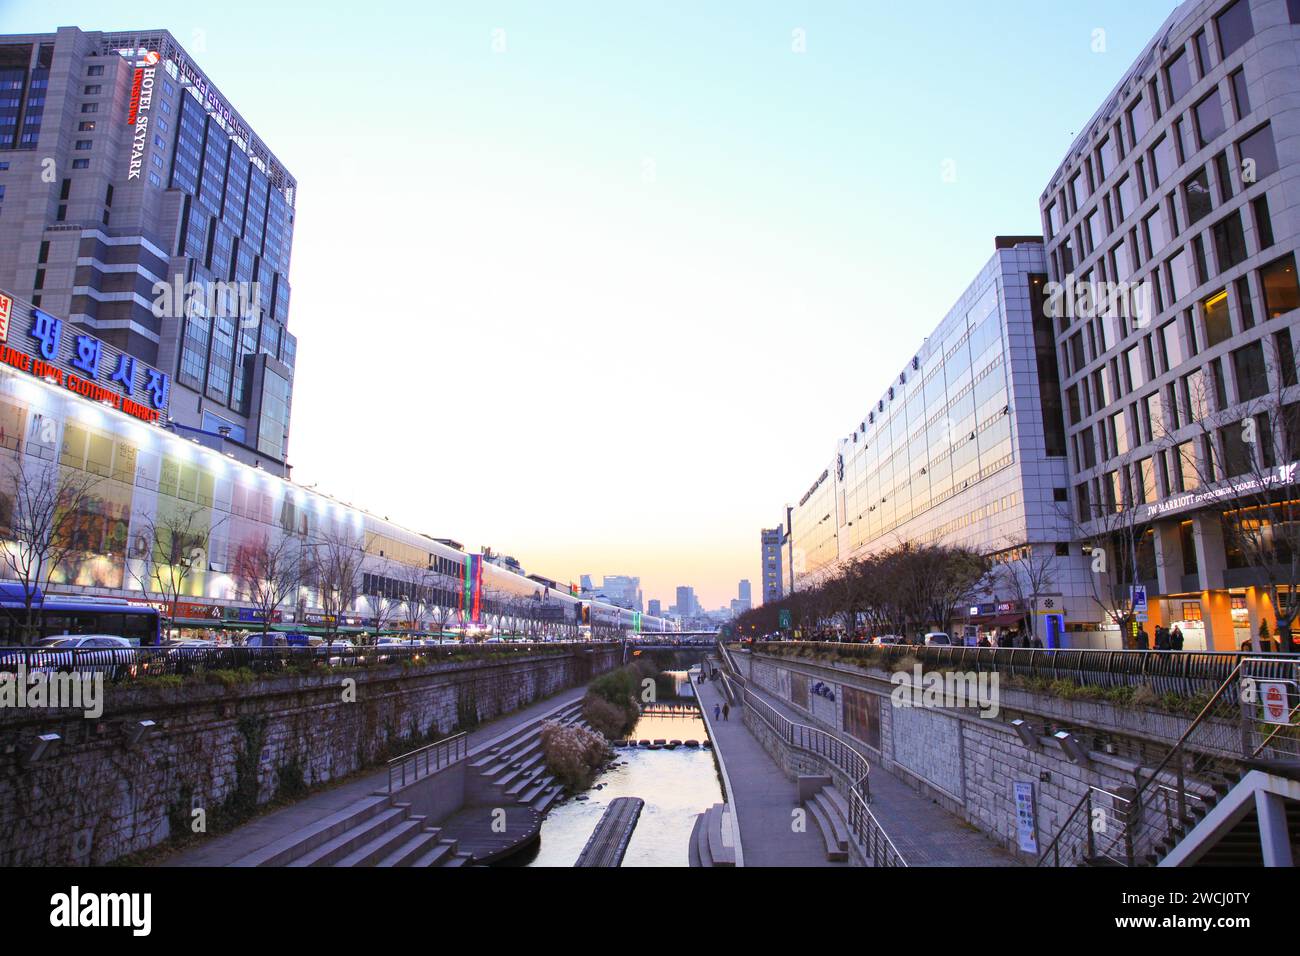 Cheonggyecheon Stream, an attraction on downtown Seoul, South Korea. Stock Photo